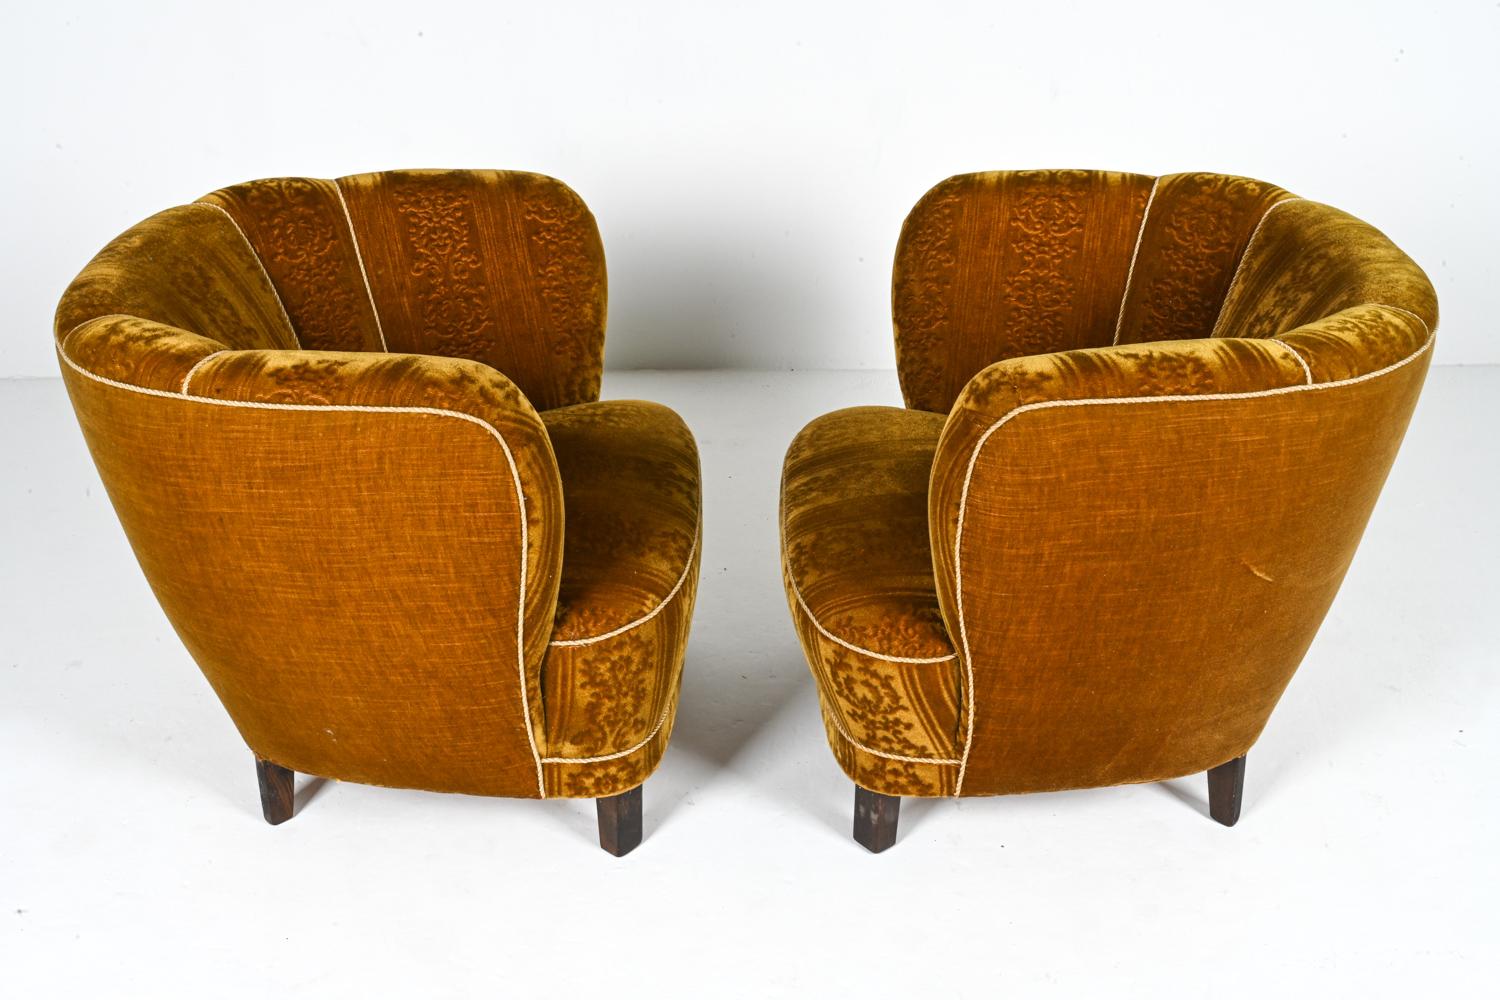 Pair of Manner of Viggo Boesen Lounge Chairs by Slagelse, c. 1940's For Sale 7